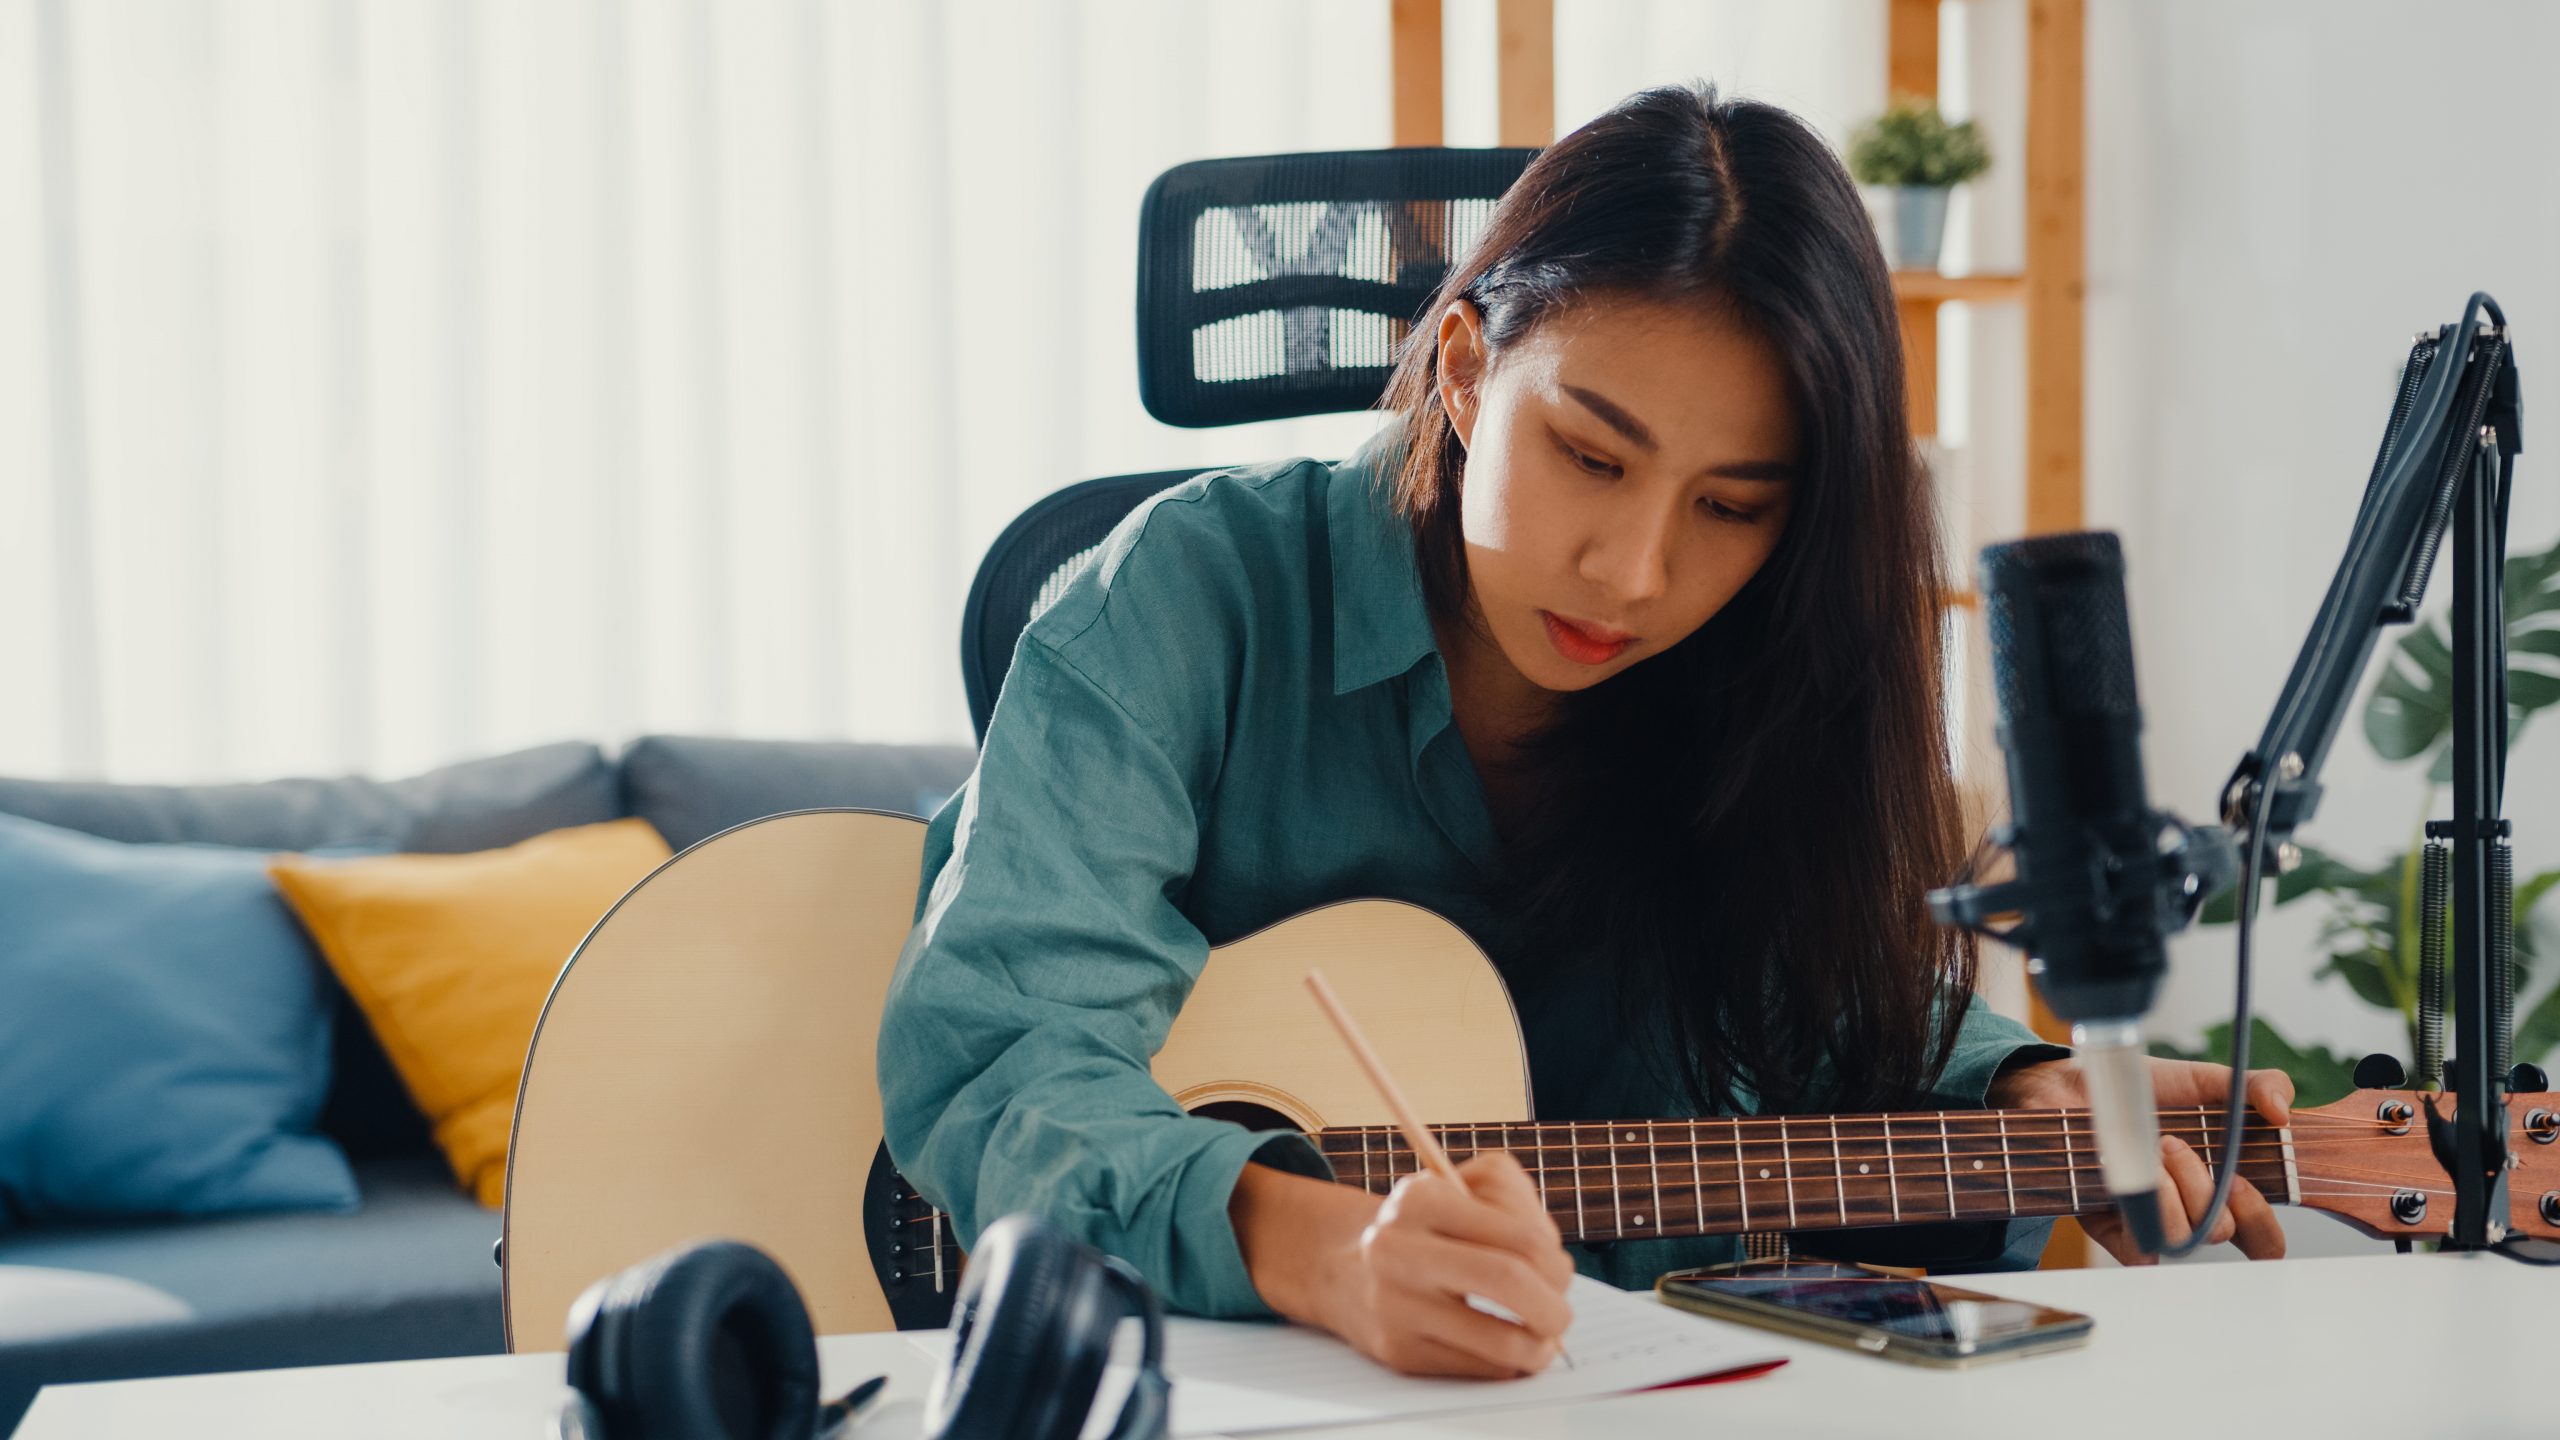 woman sitting in her living room writing on a score while holding a guitar